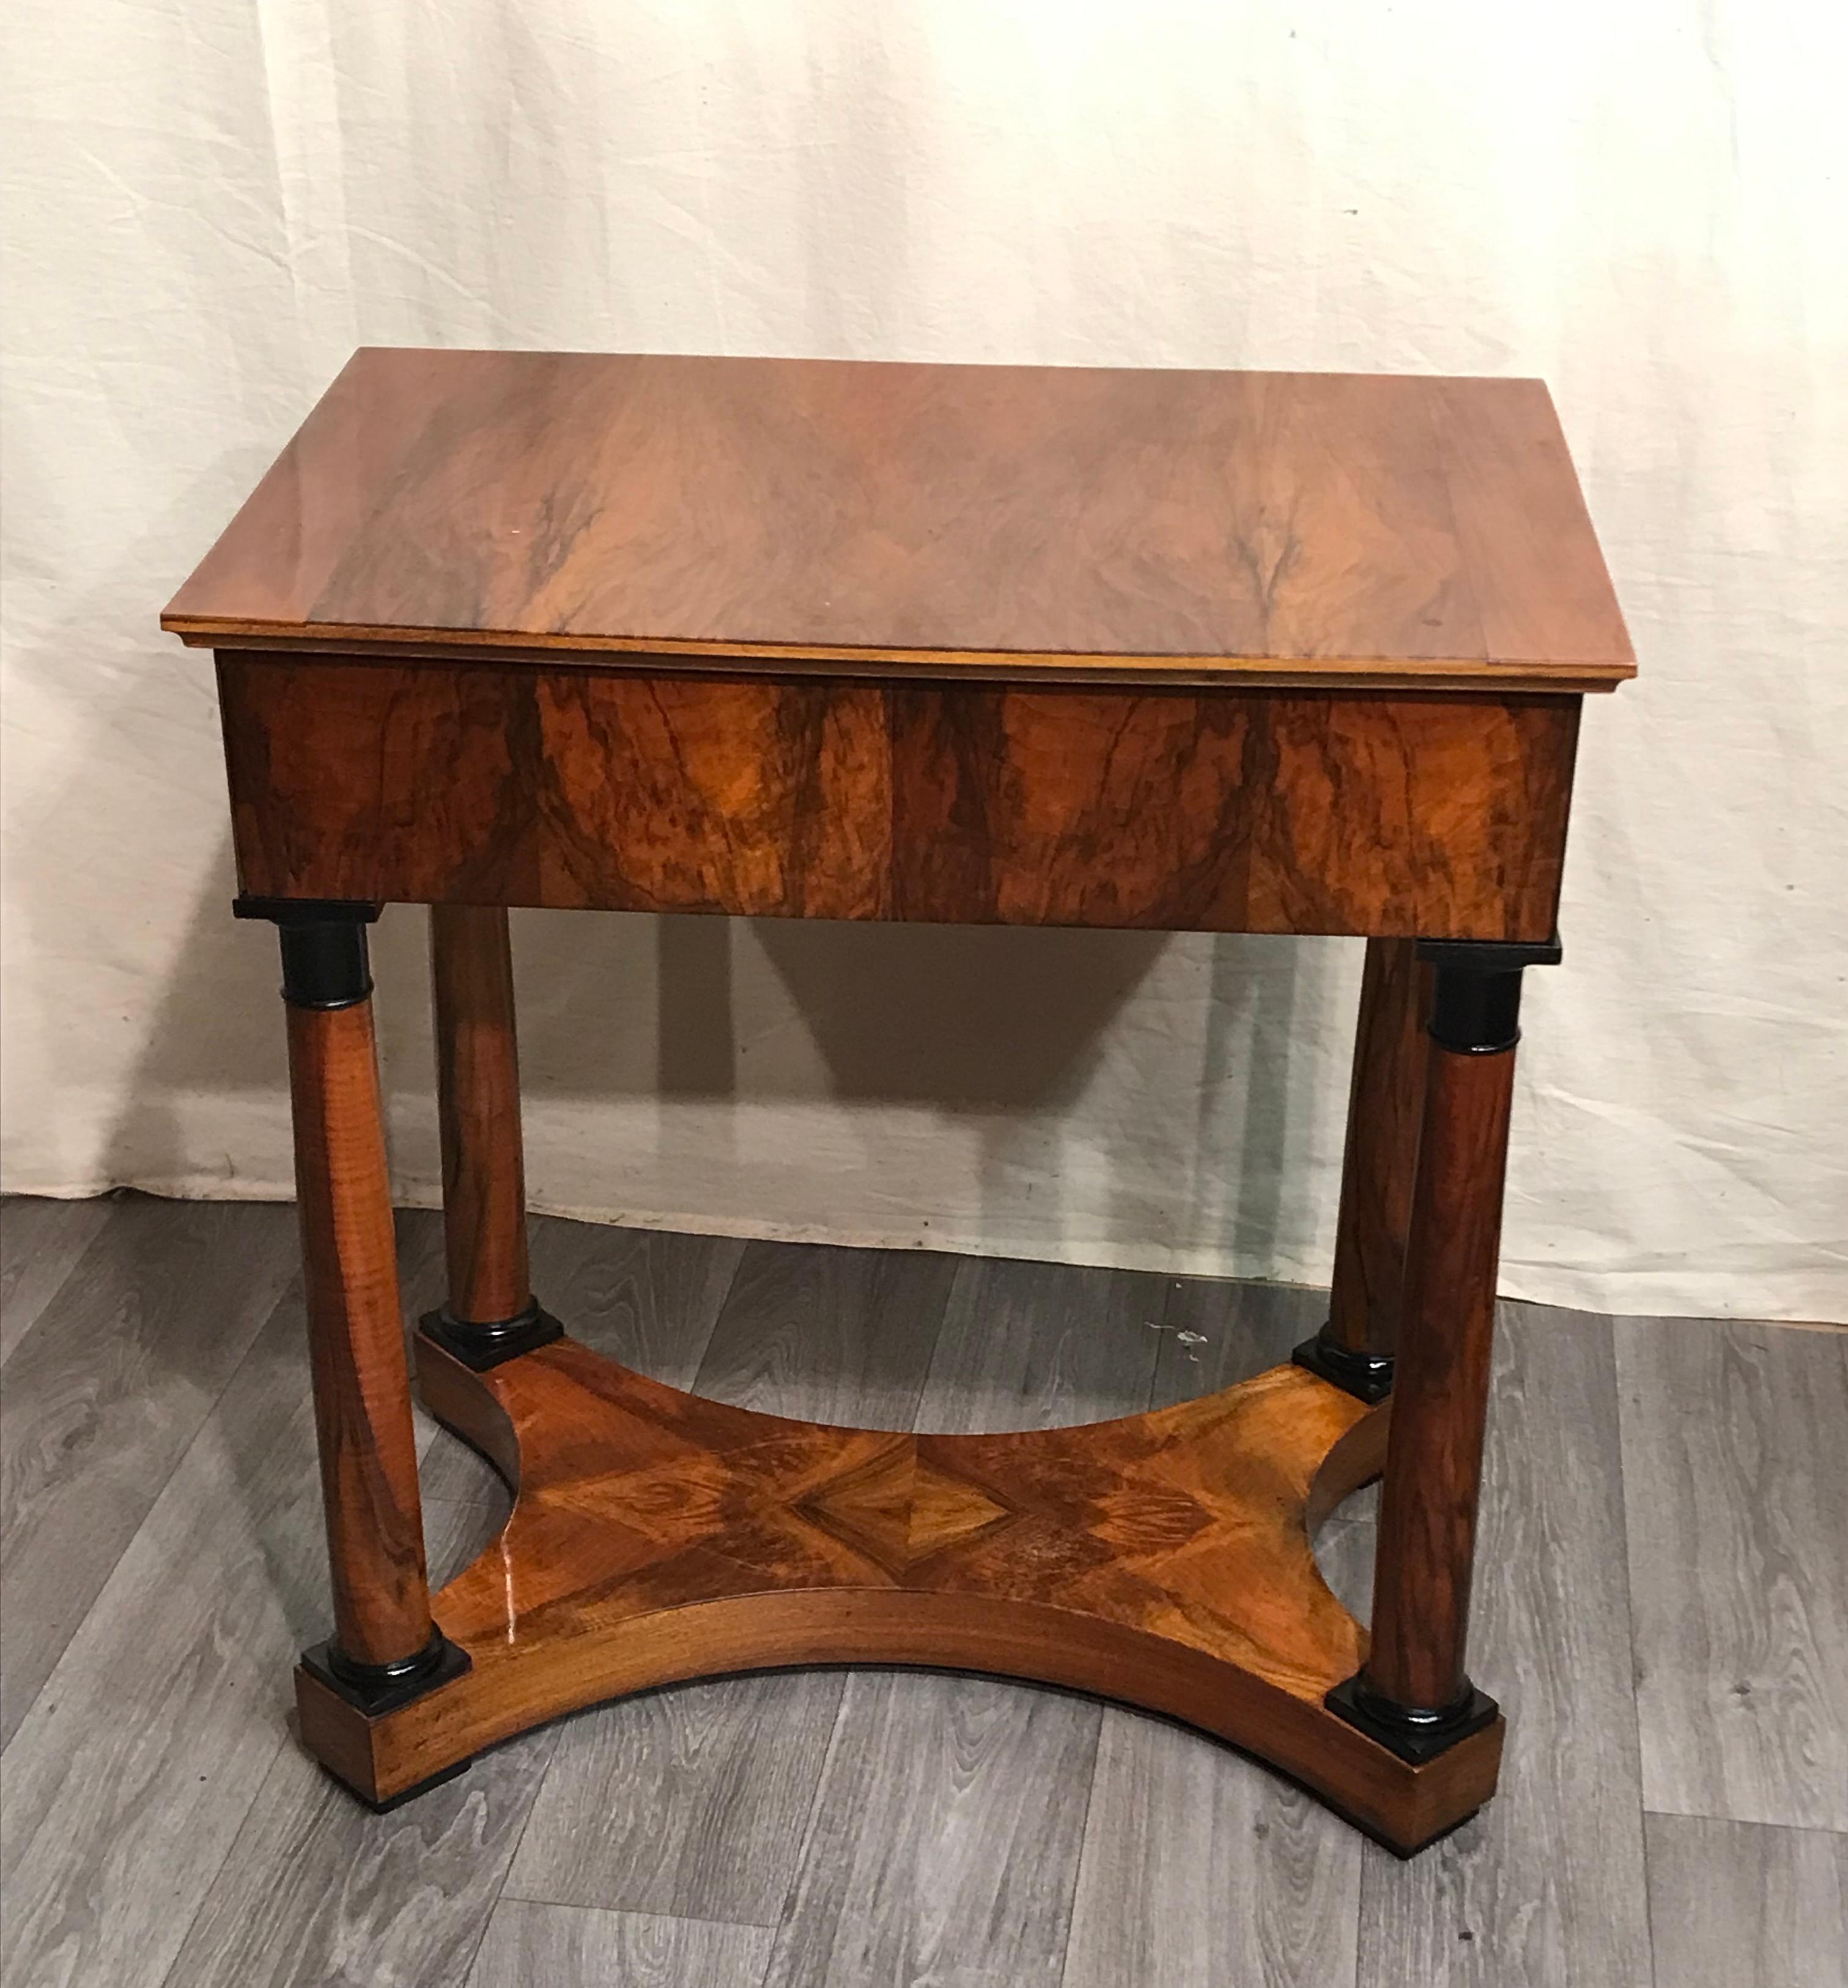 Unique Biedermeier console table which dates back to 1820 and comes from southern Germany. This elegant console table stands out for its classic Biedermeier design. The four columnar feet stand on a beautifully veneered plinth. The columns have